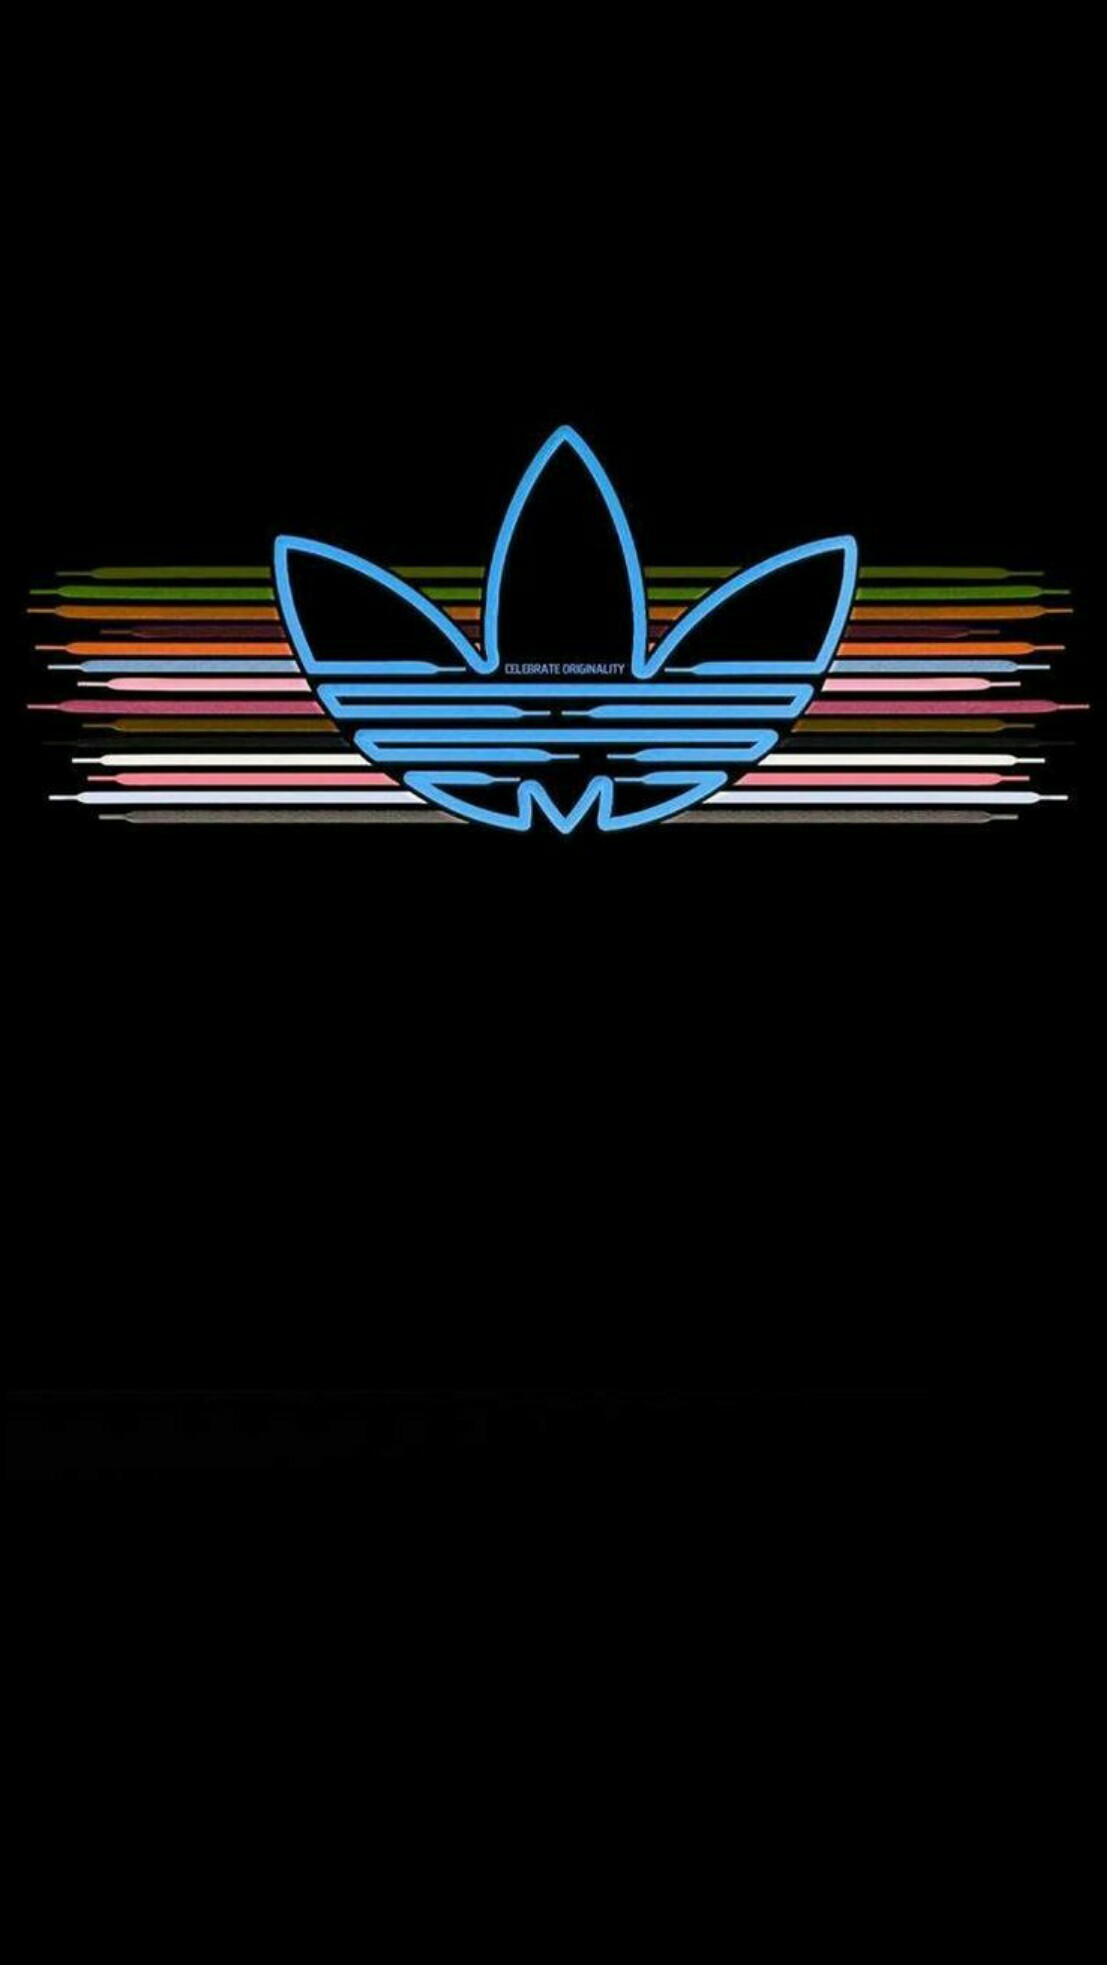 Adidas Iphone Wallpaper 72 Images